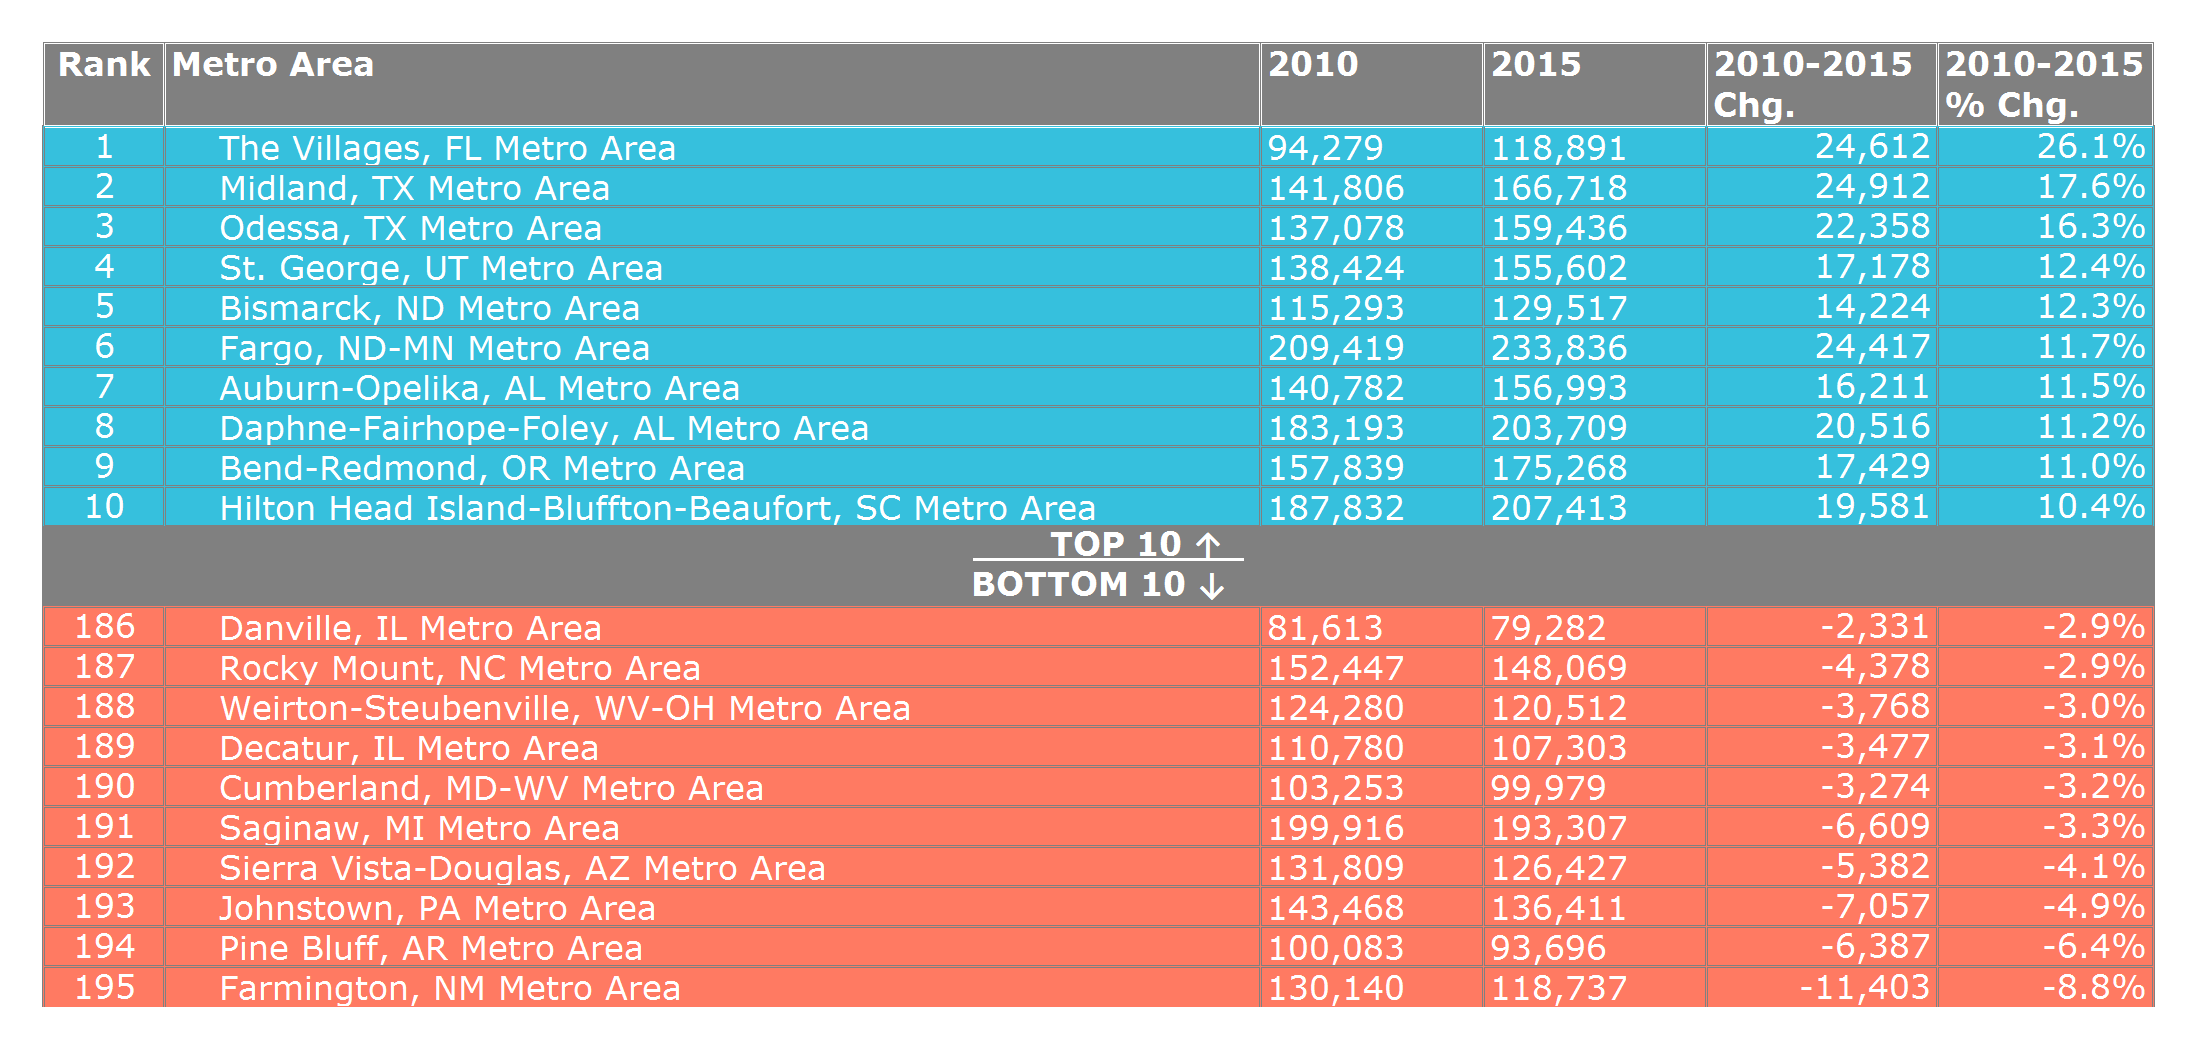 Top 10 & Bottom 10 Small Metro Areas Ranked by 2010-2015 Population Growth